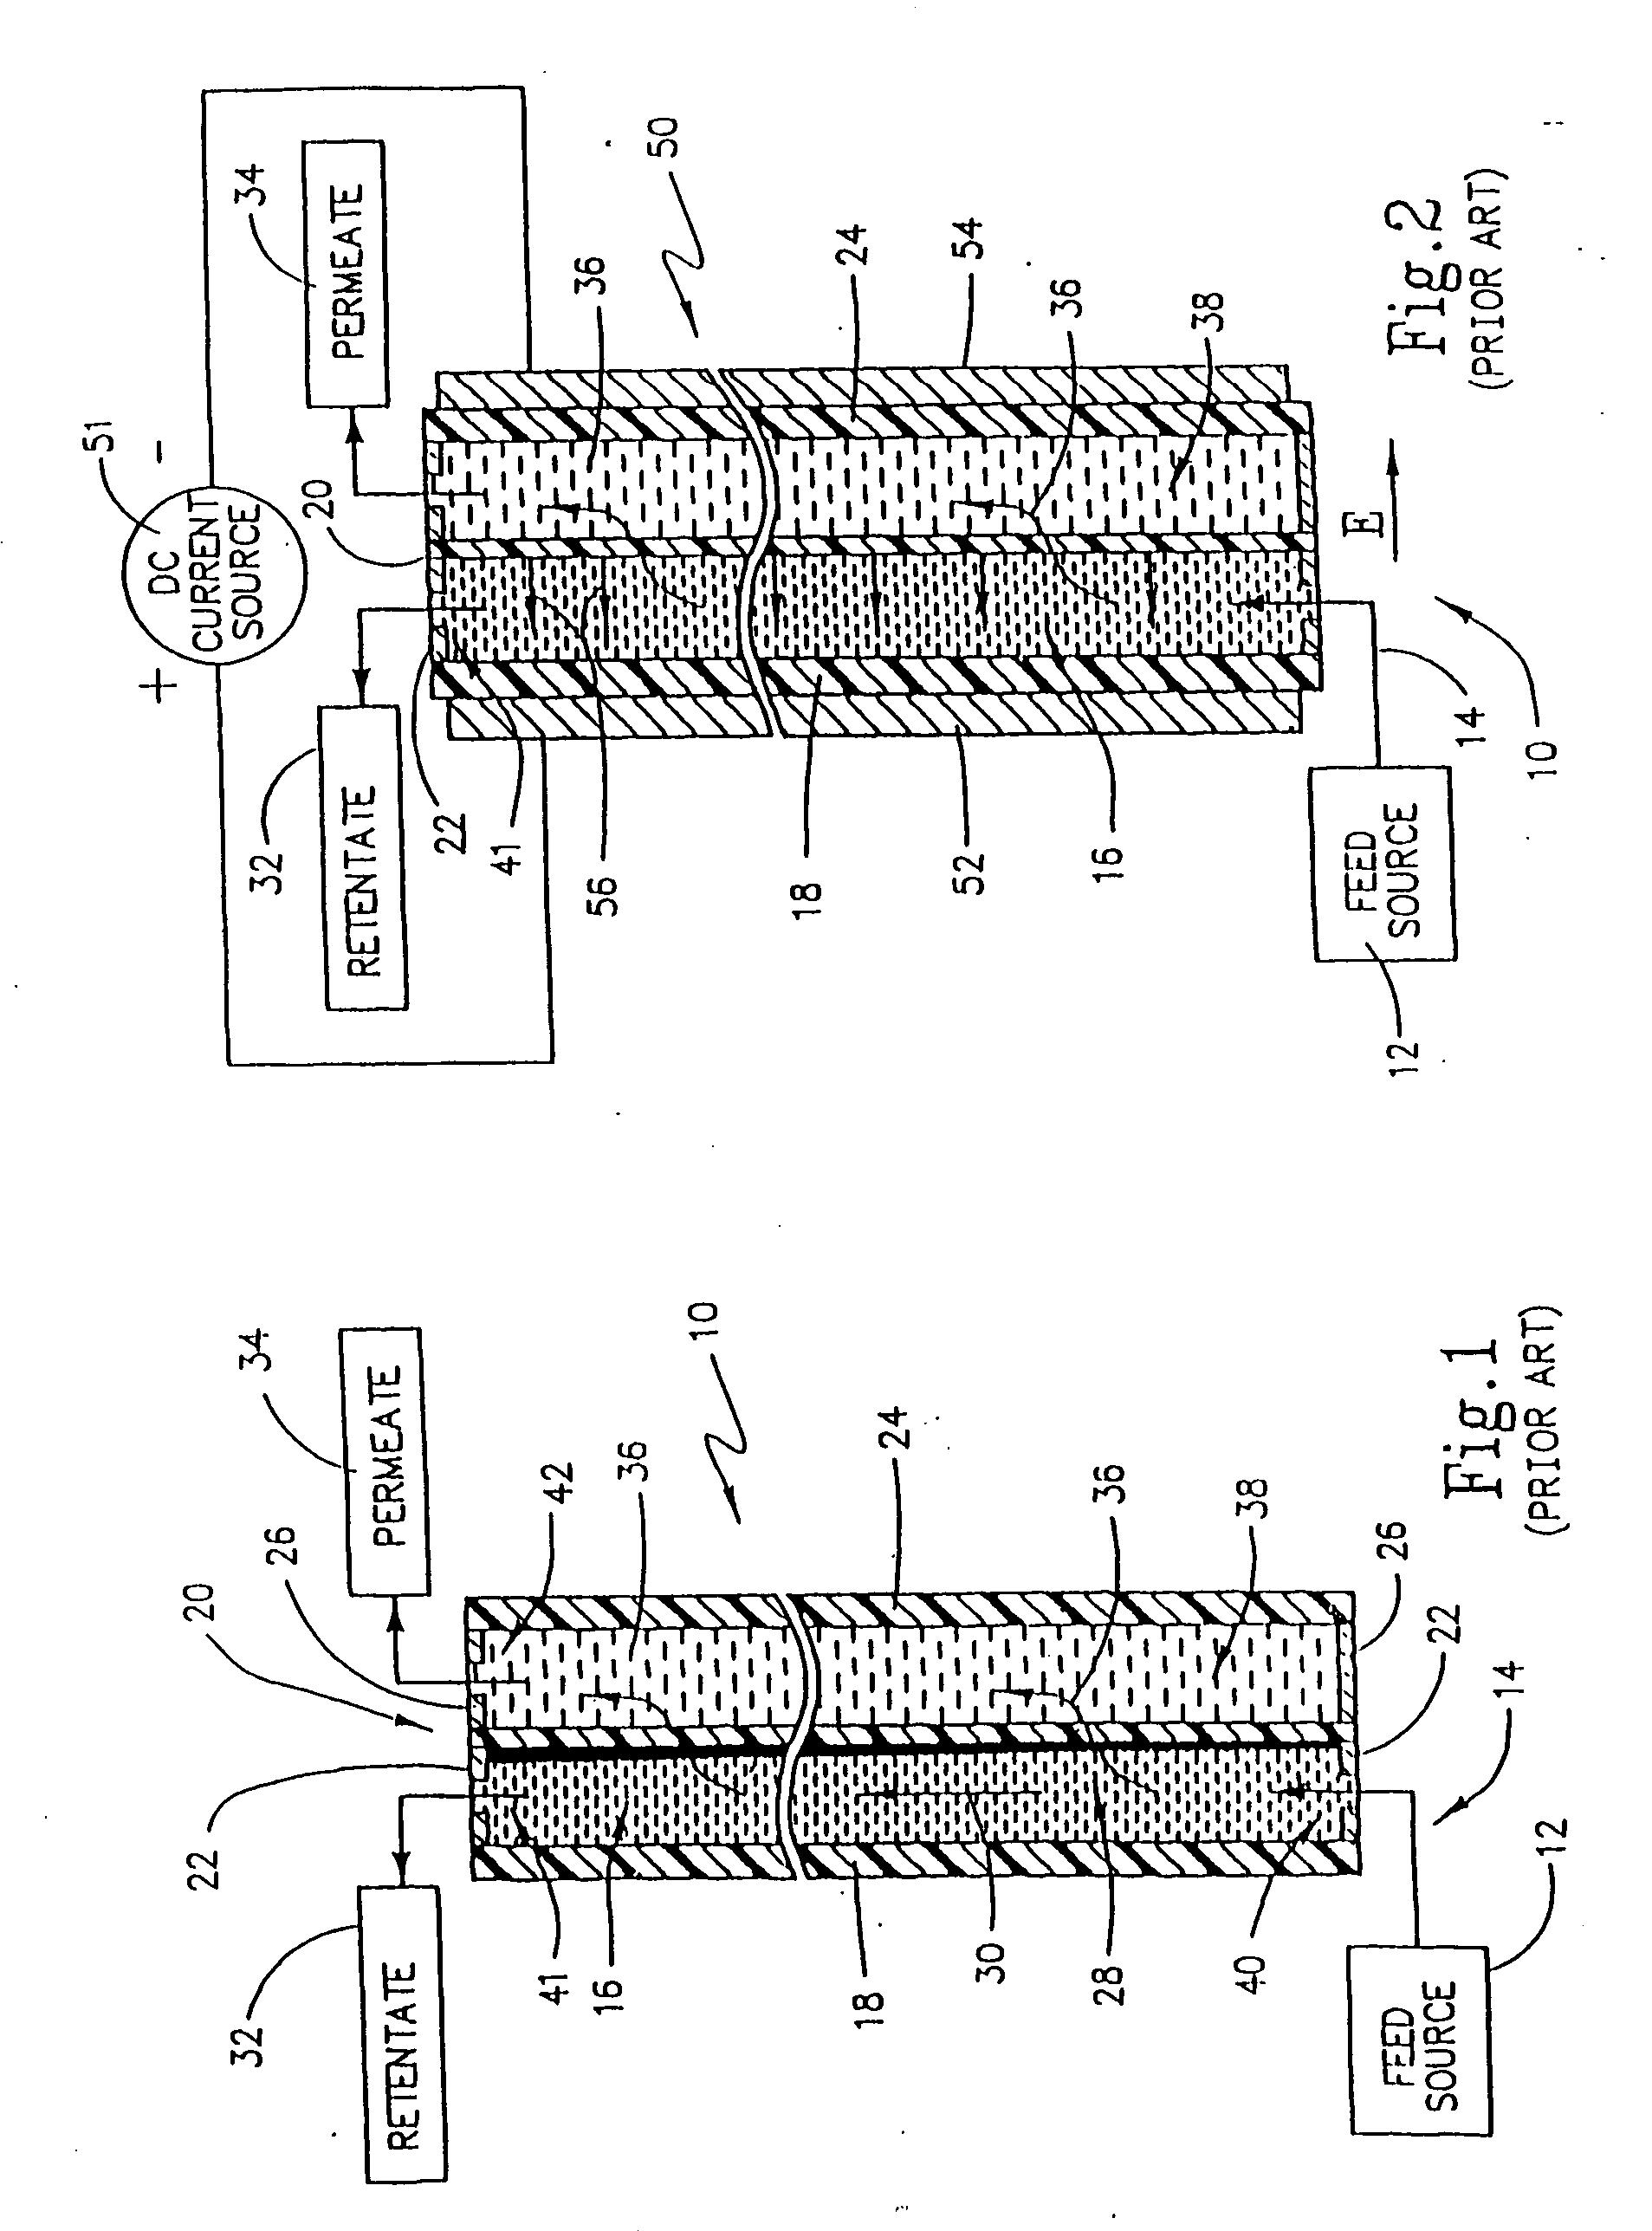 Electrophoretic cross-flow filtration and electrodeionization method for treating effluent waste and apparatus for use therewith